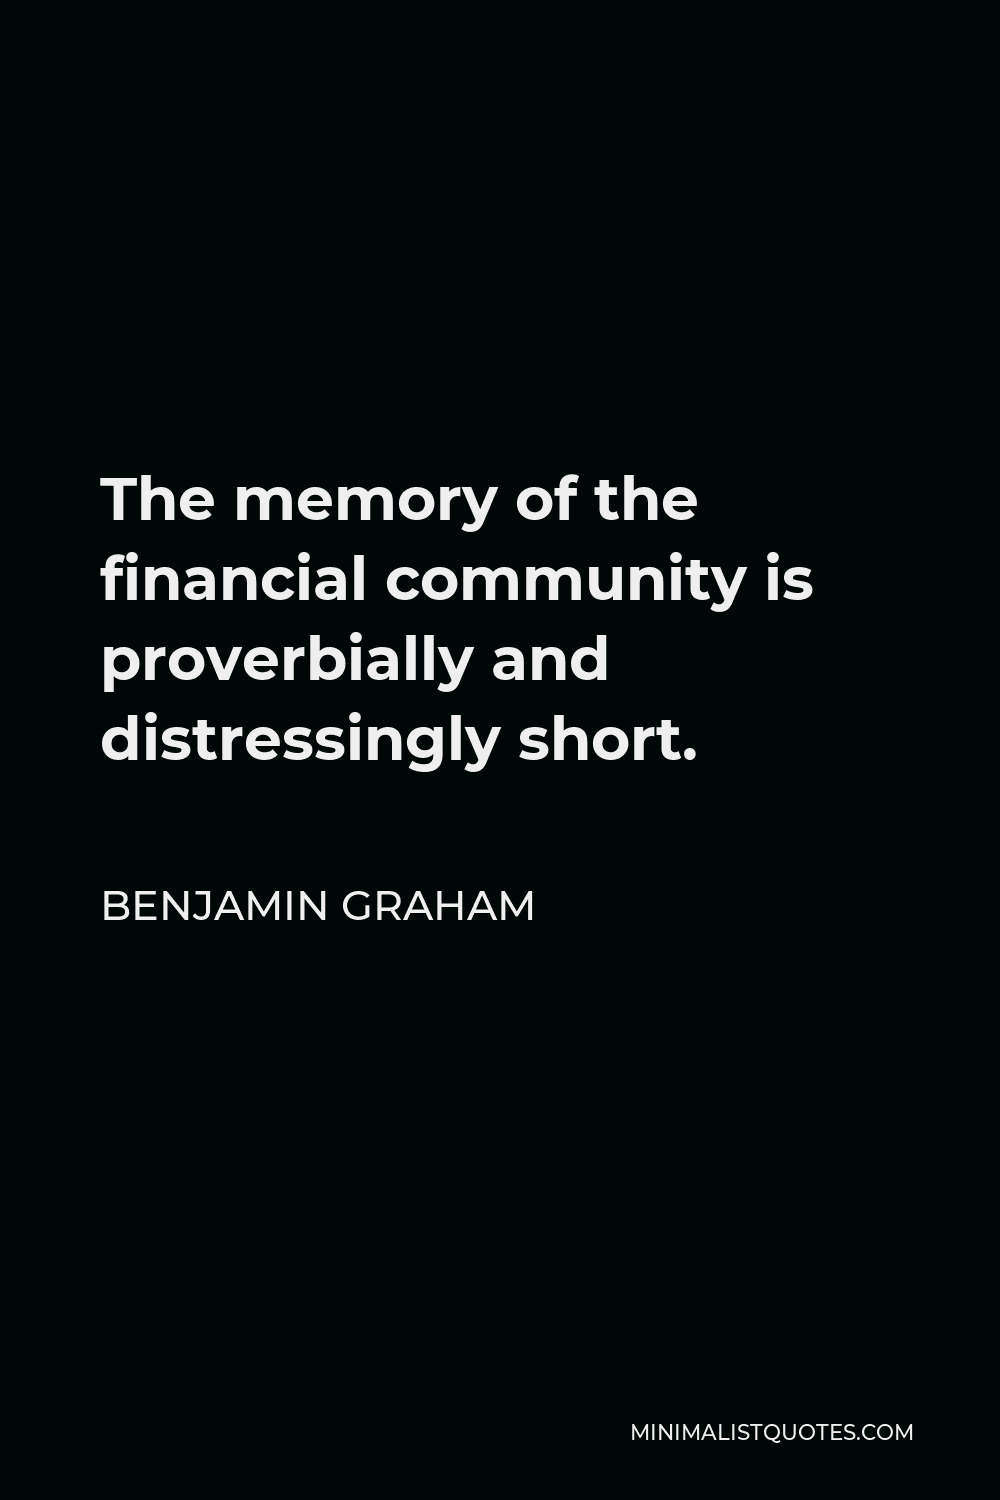 Benjamin Graham Quote - The memory of the financial community is proverbially and distressingly short.